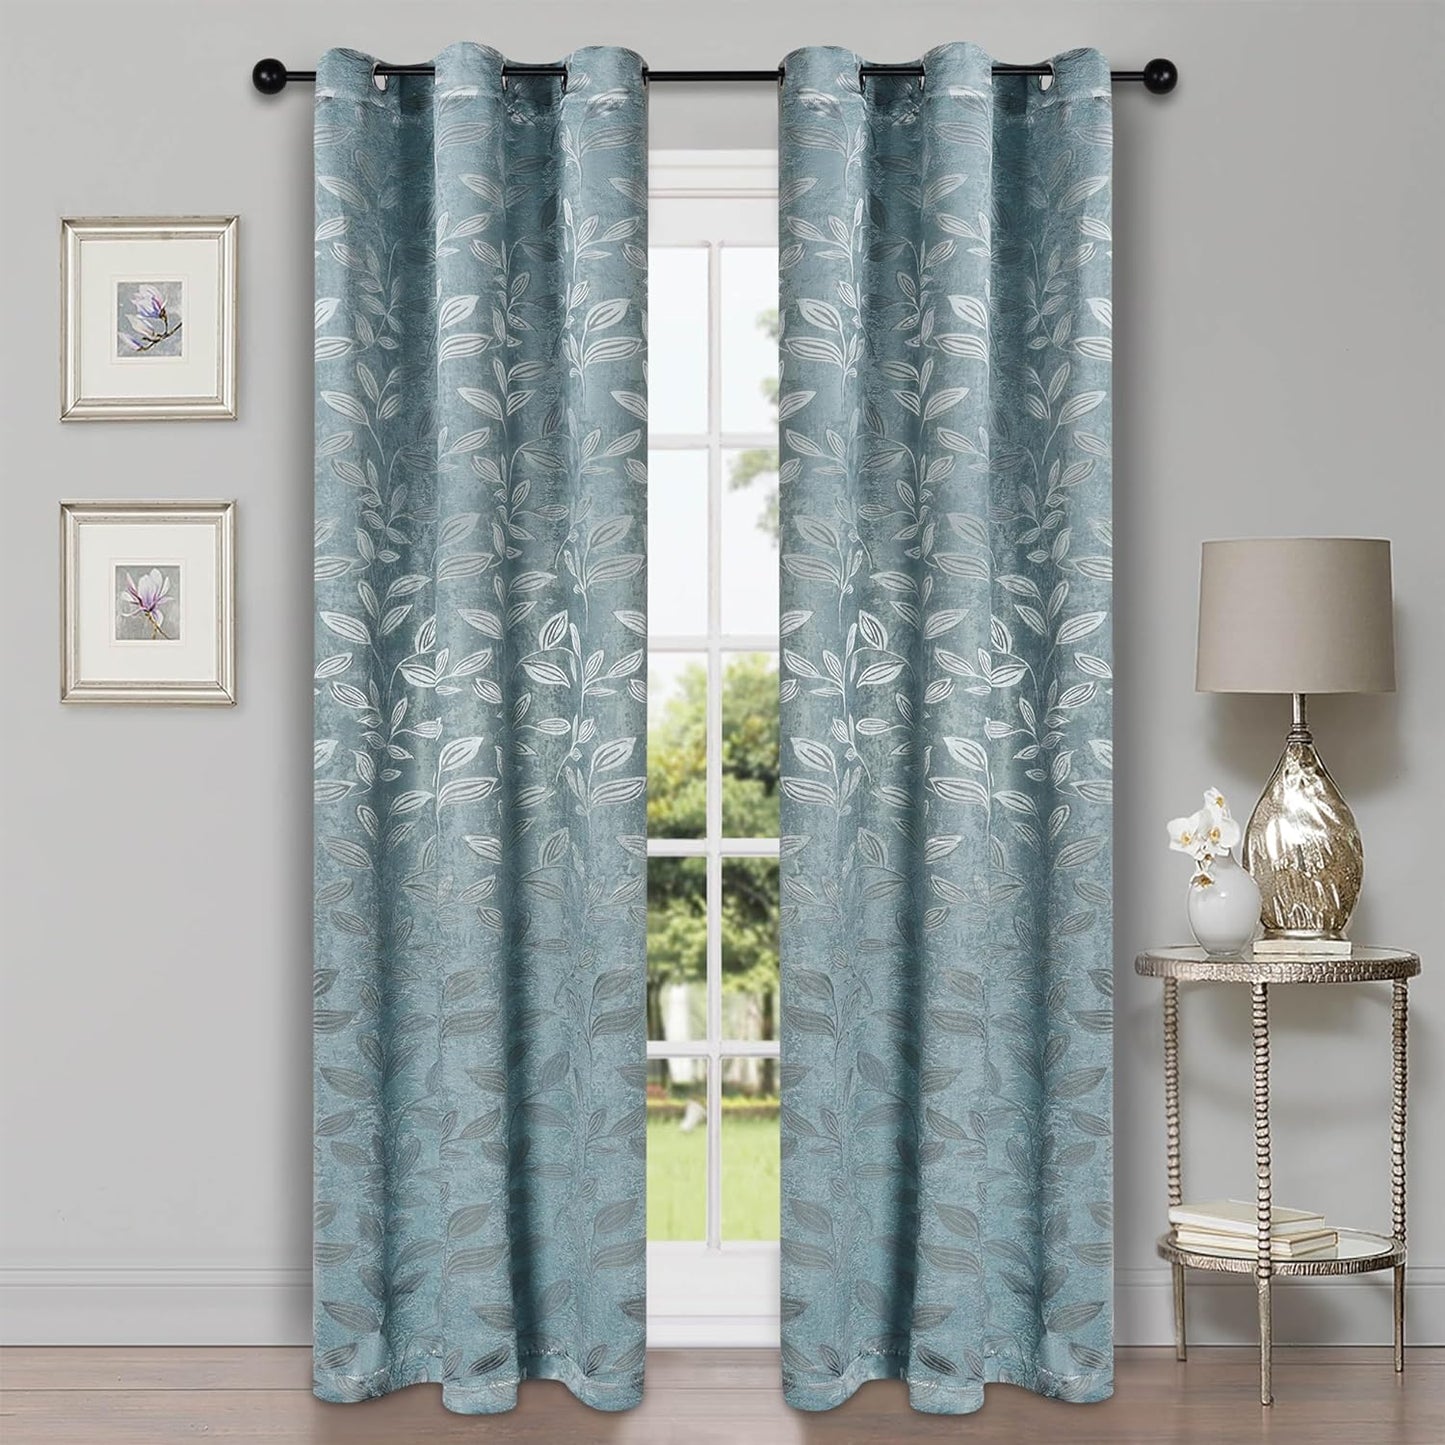 Superior Blackout Curtains, Room Darkening Window Accent for Bedroom, Sun Blocking, Thermal, Modern Bohemian Curtains, Leaves Collection, Set of 2 Panels, Rod Pocket - 52 in X 63 In, Nickel Black  Home City Inc. Green Lily 42 In X 84 In (W X L) 